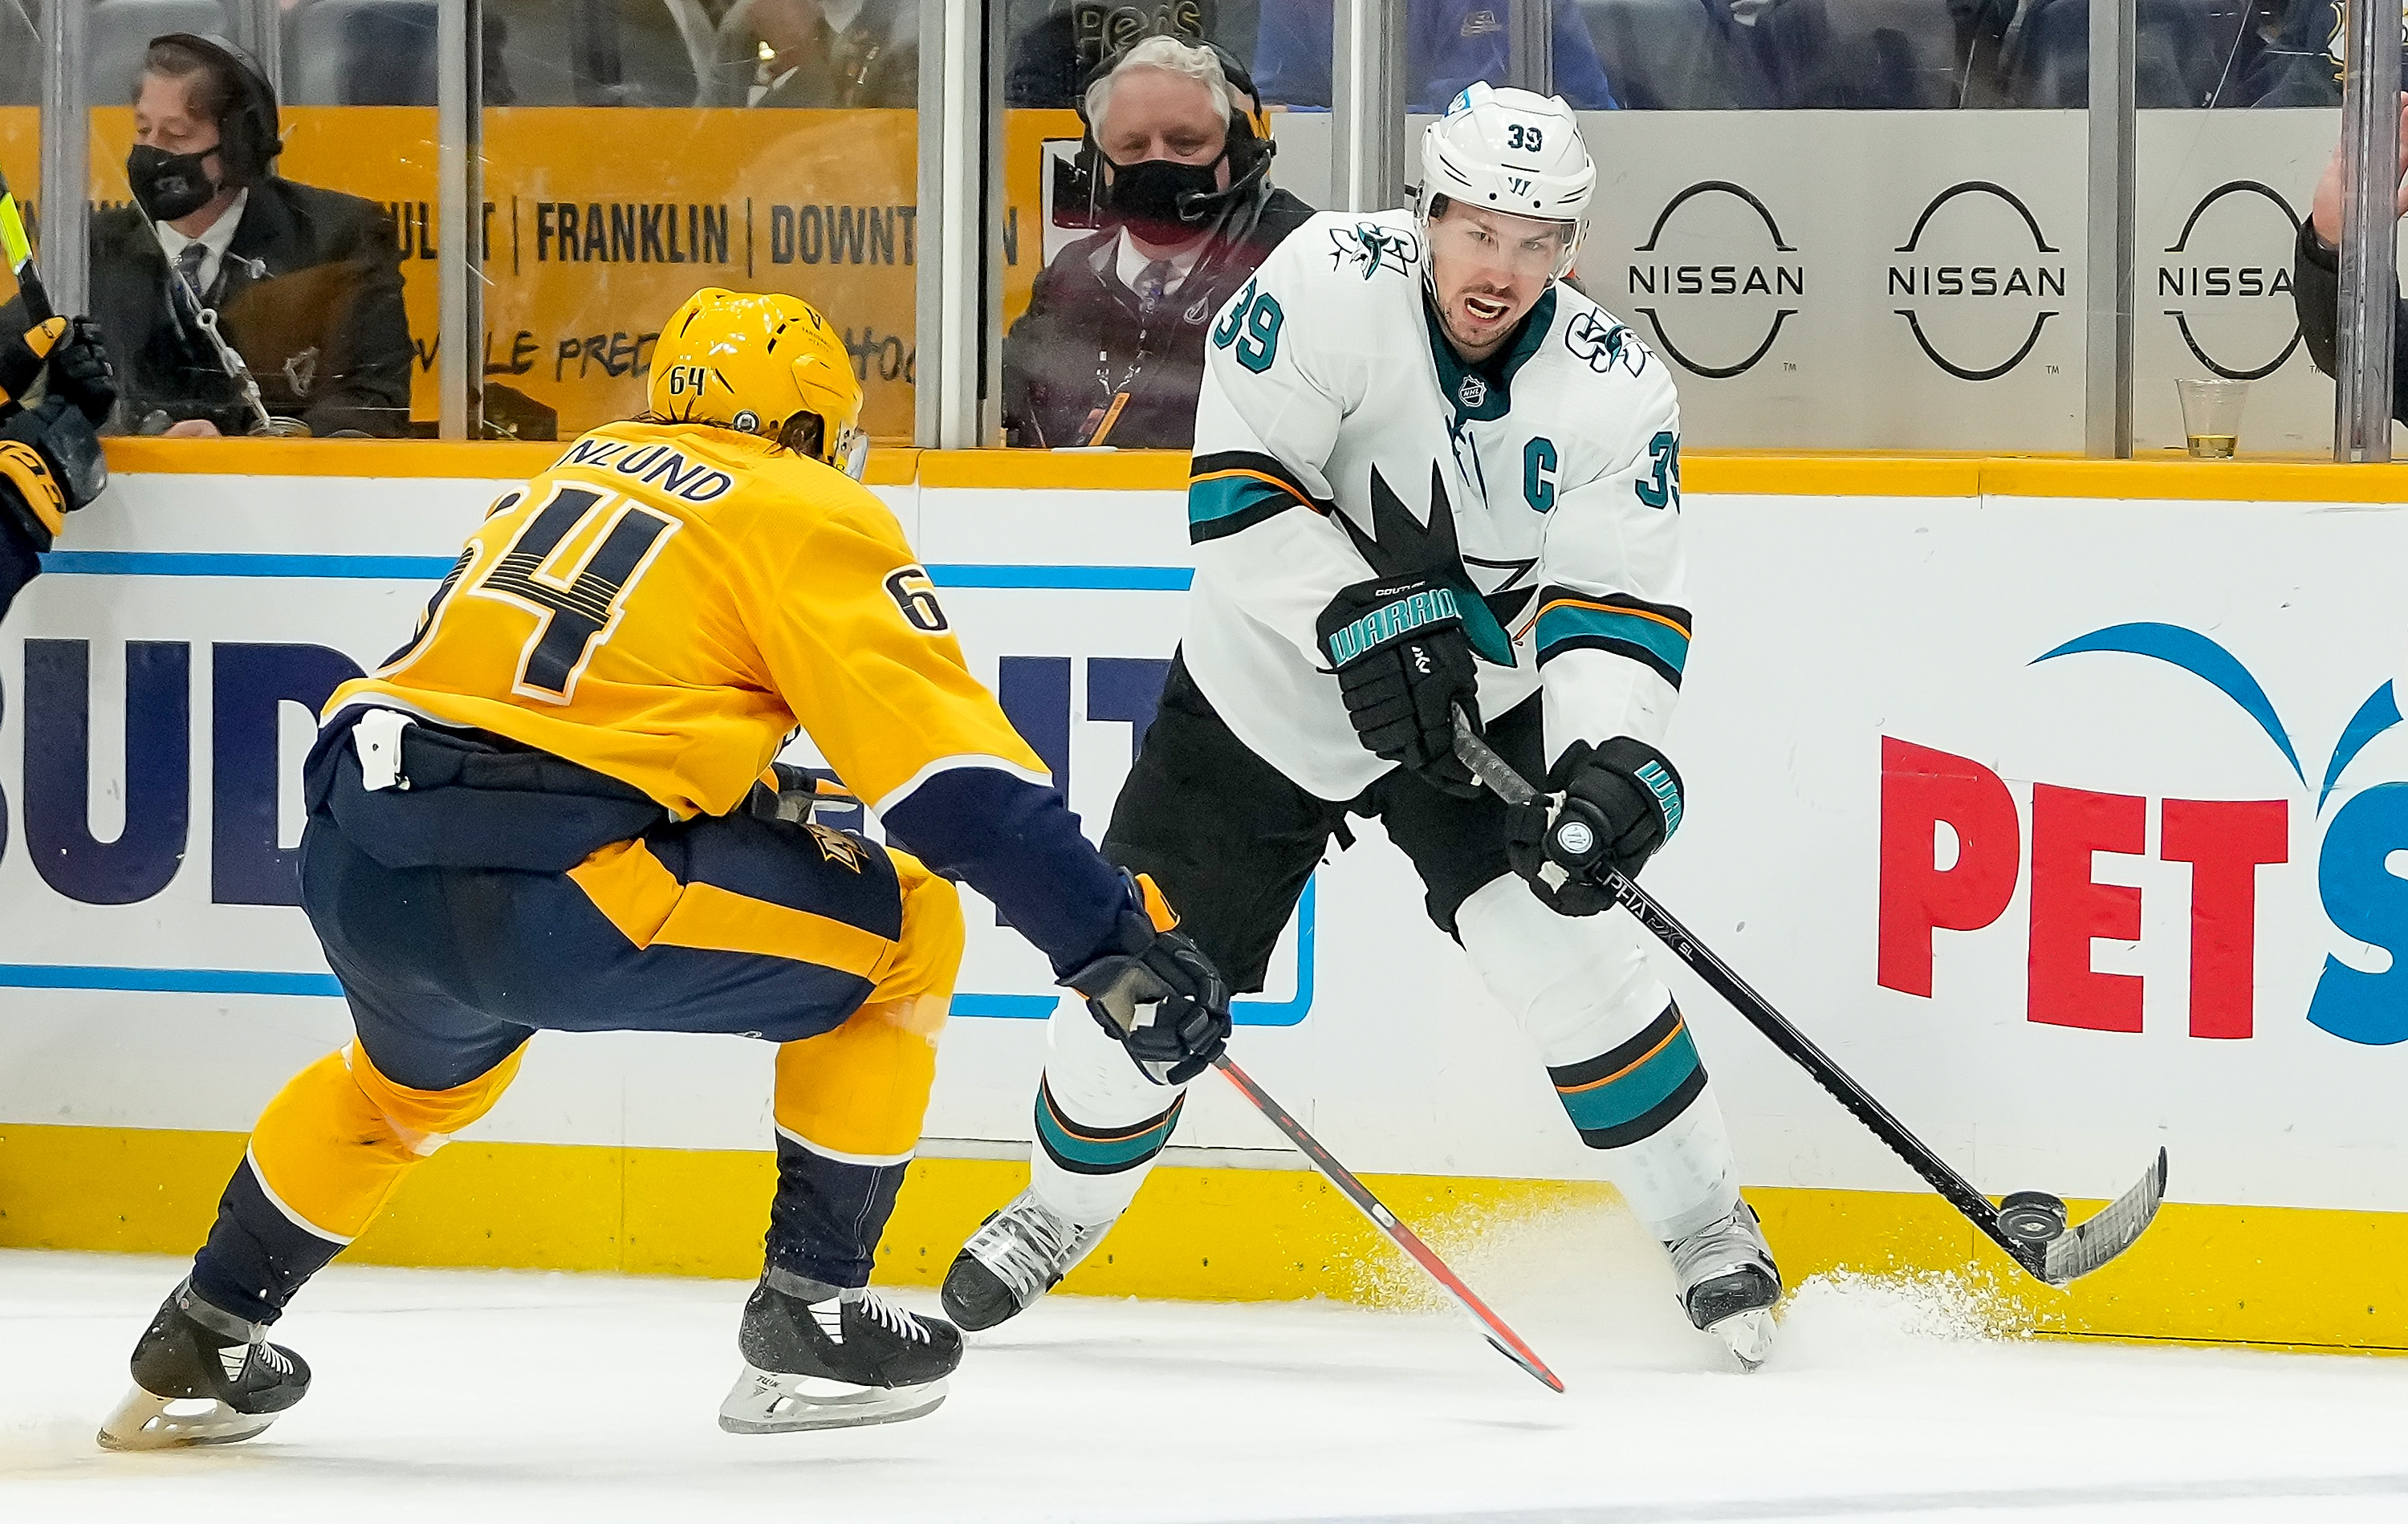 Logan Couture #39 of the San Jose Sharks skates against Mikael Granlund #64 of the Nashville Predators during an NHL game at Bridgestone Arena on October 26, 2021 in Nashville, Tennessee.